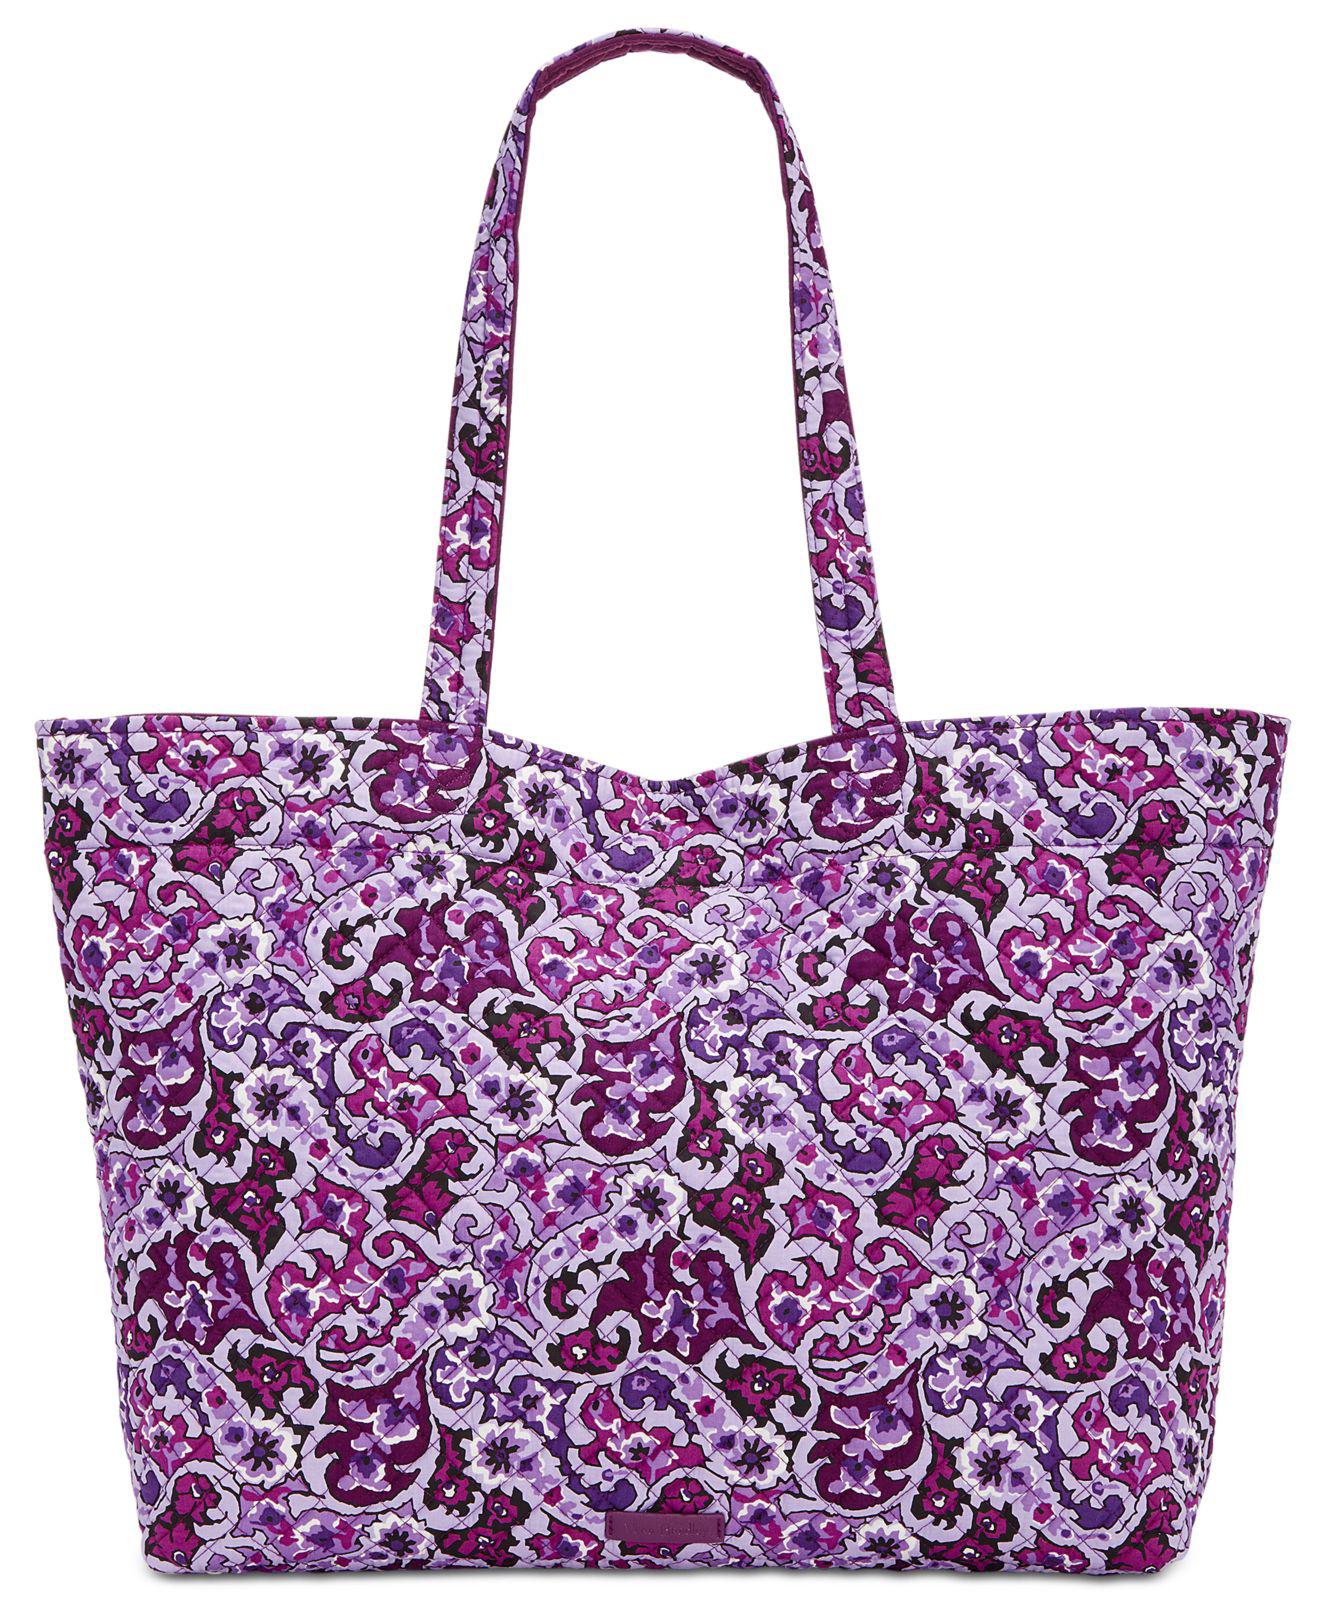 Lyst - Vera Bradley Iconic Grand Extra-large Tote in Purple